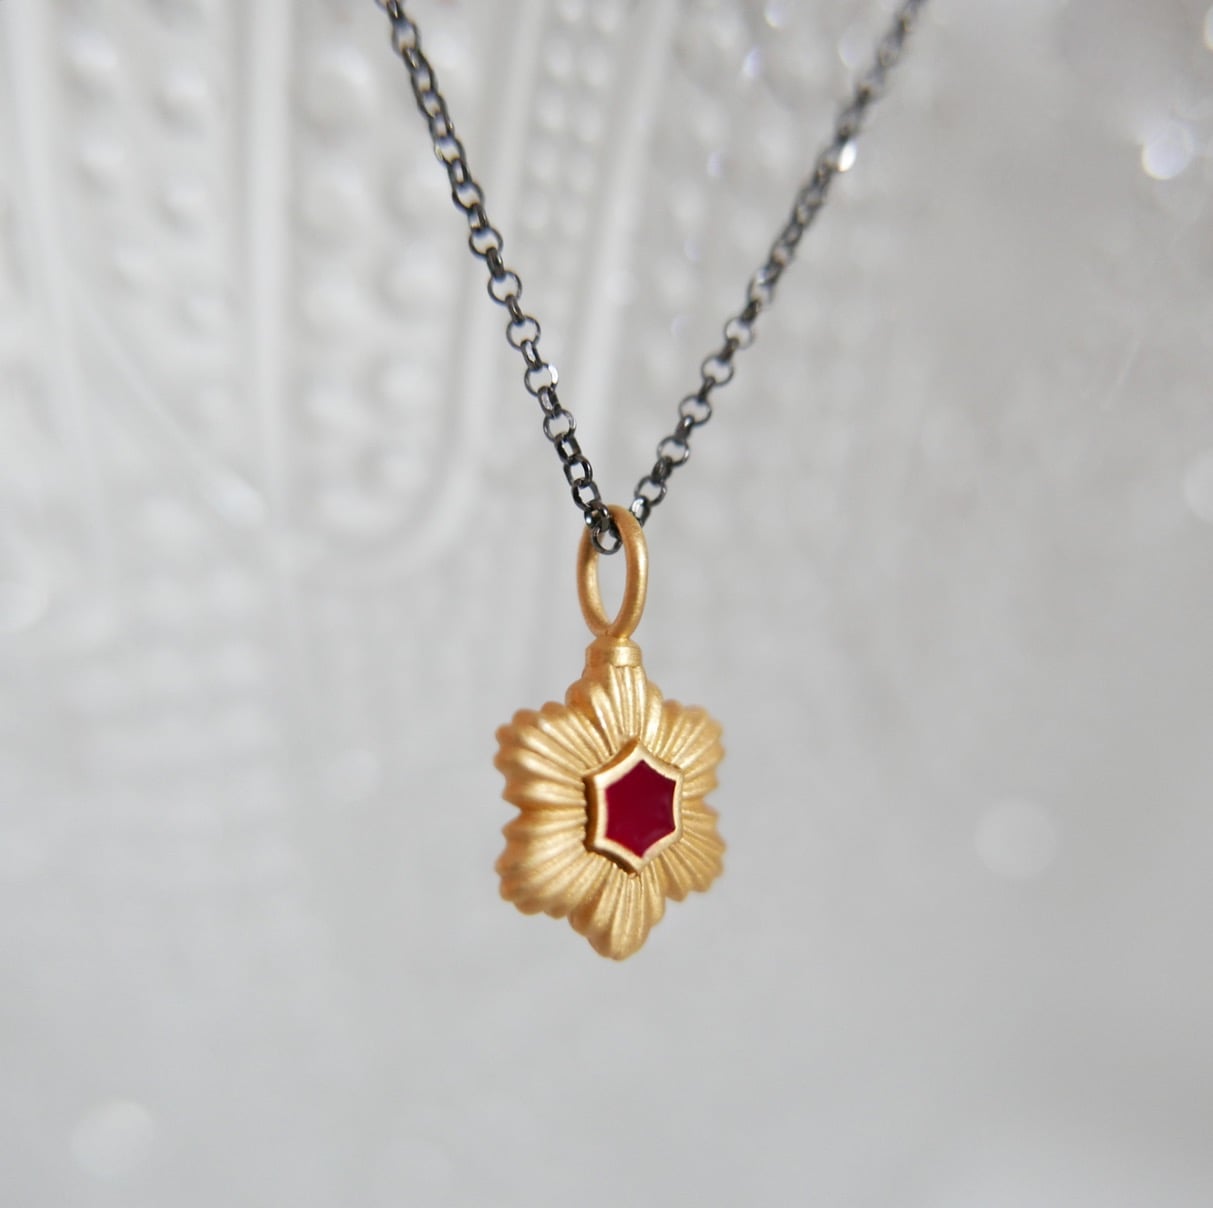 Handmade Necklace With Gold Plated Silver Star Pendant - Anthos Crafts